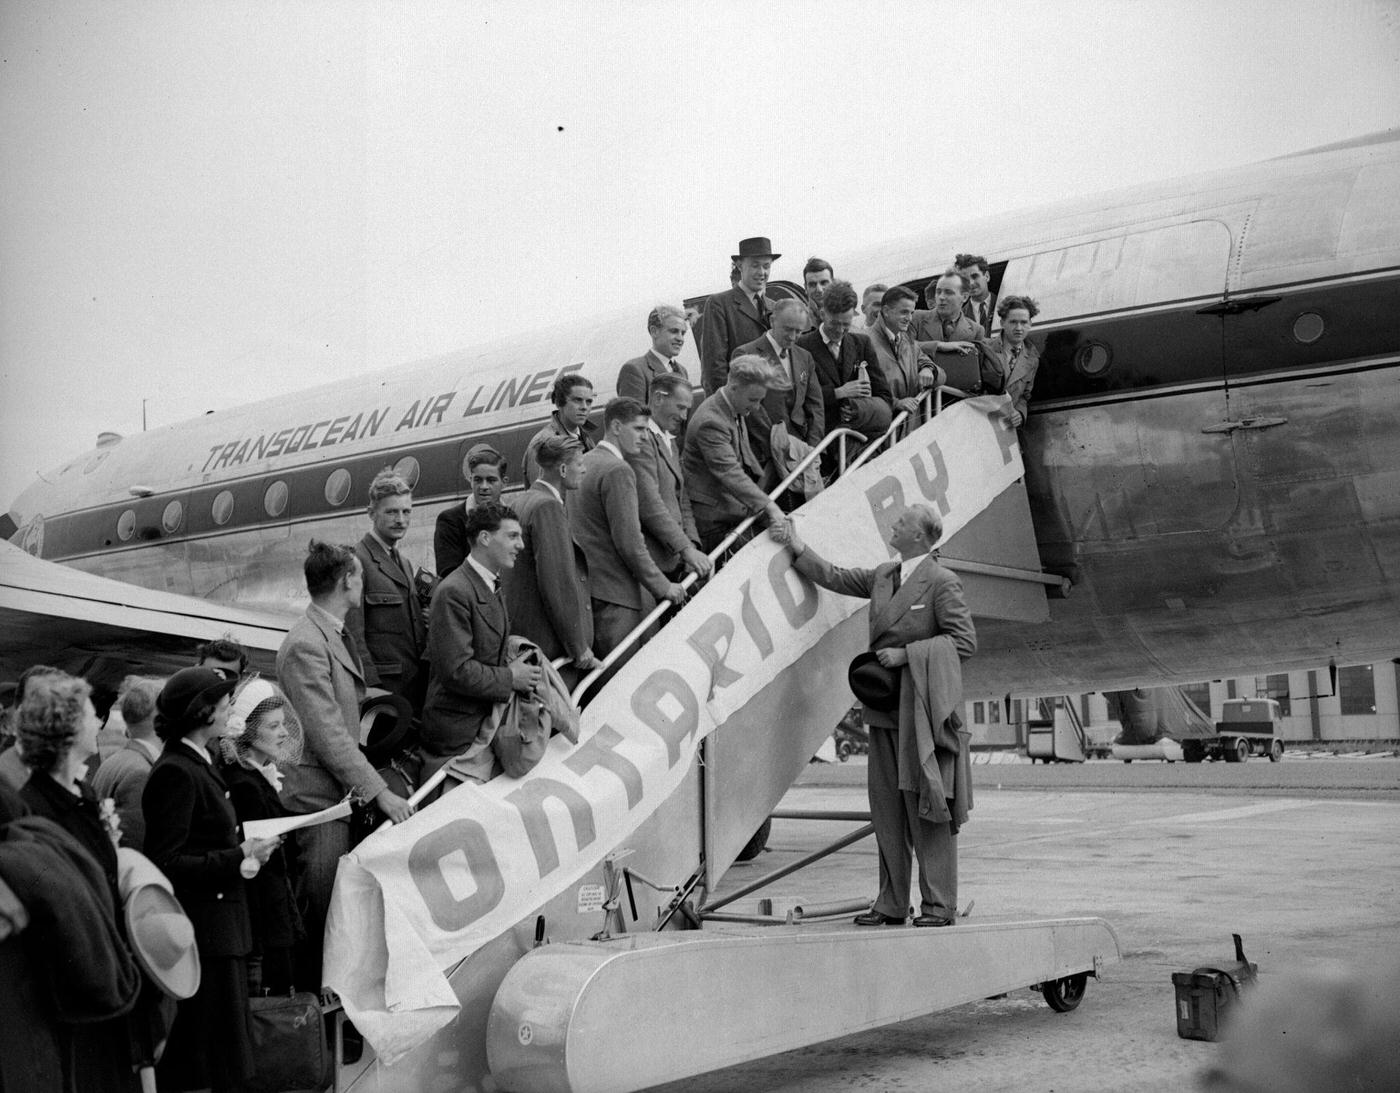 In 1947, J S Armstrong of the Canadian consulate is saying goodbye to a group of emigrants leaving for Ontario.